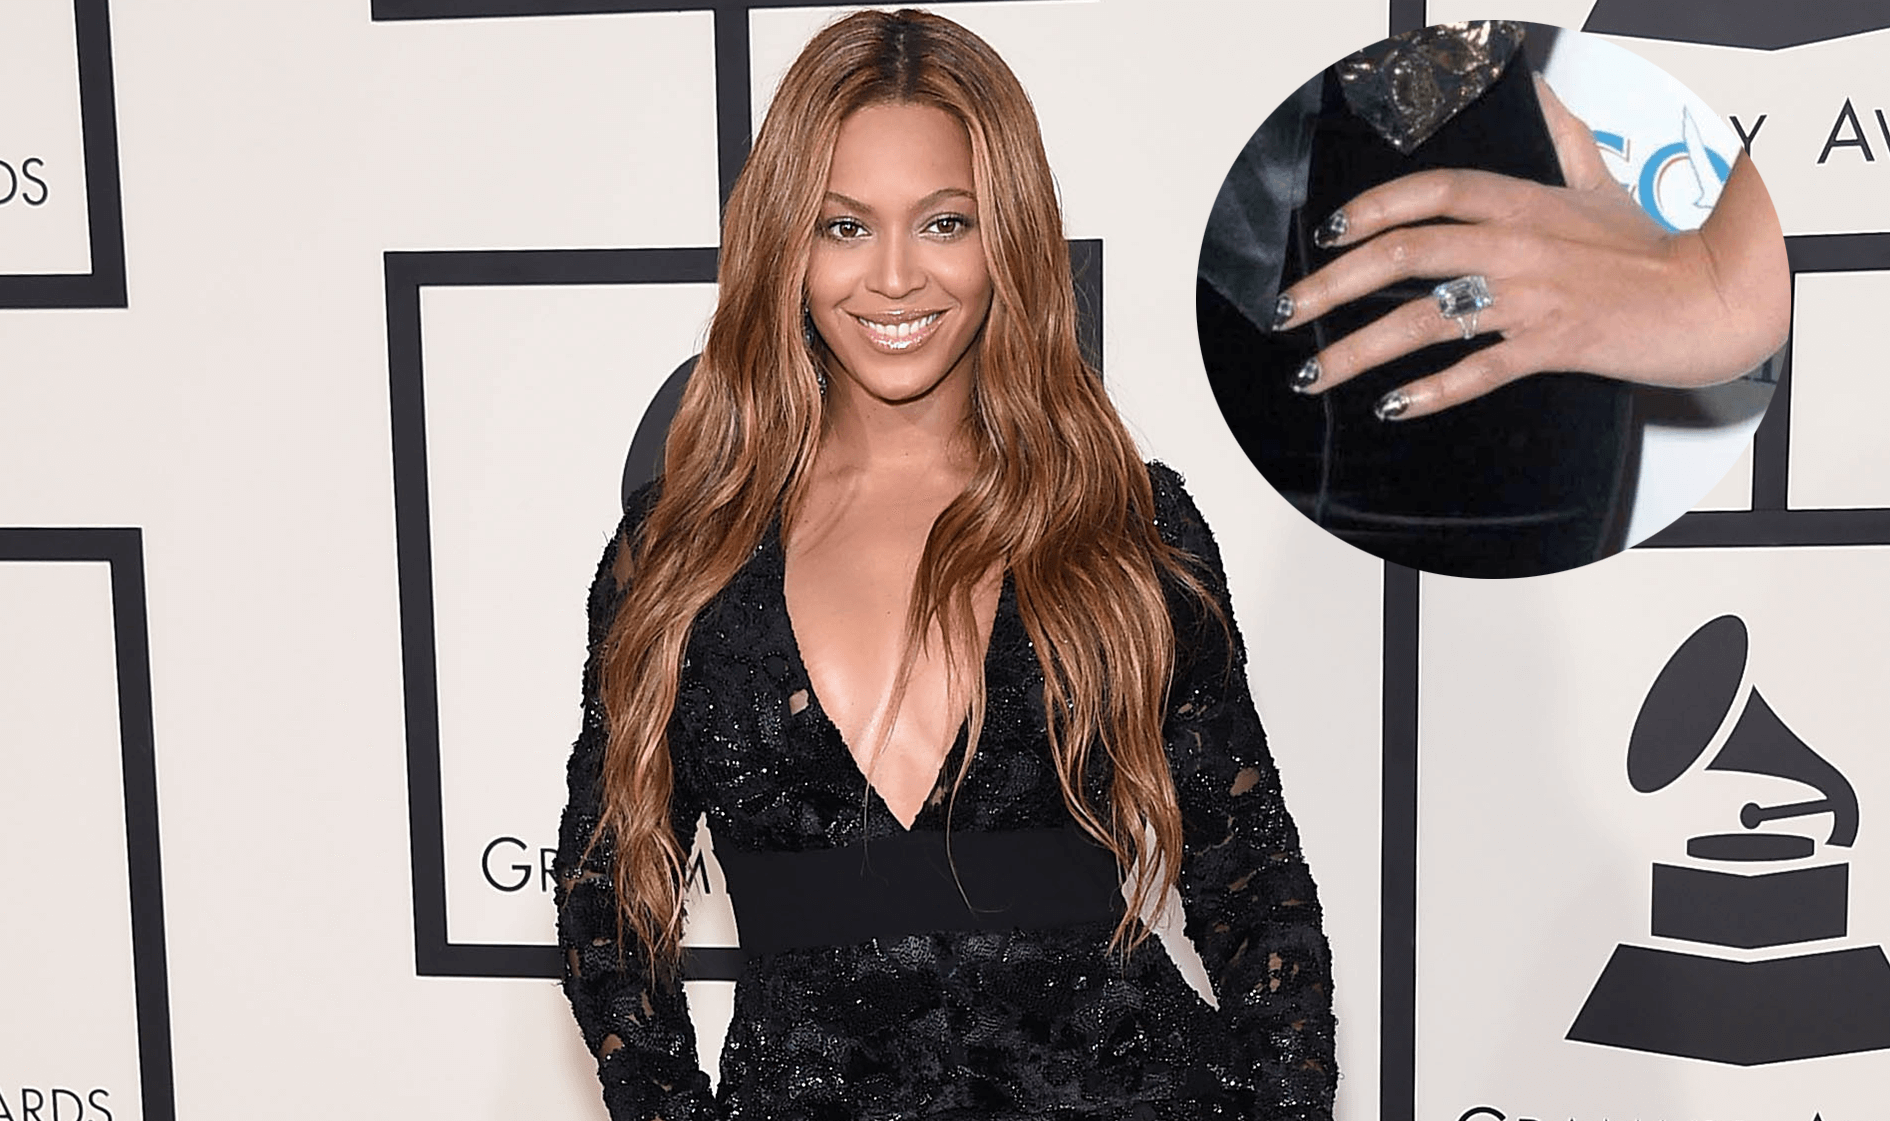 From Colour To Carat Size: A Deep Dive Into Beyonce's Engagement Ring